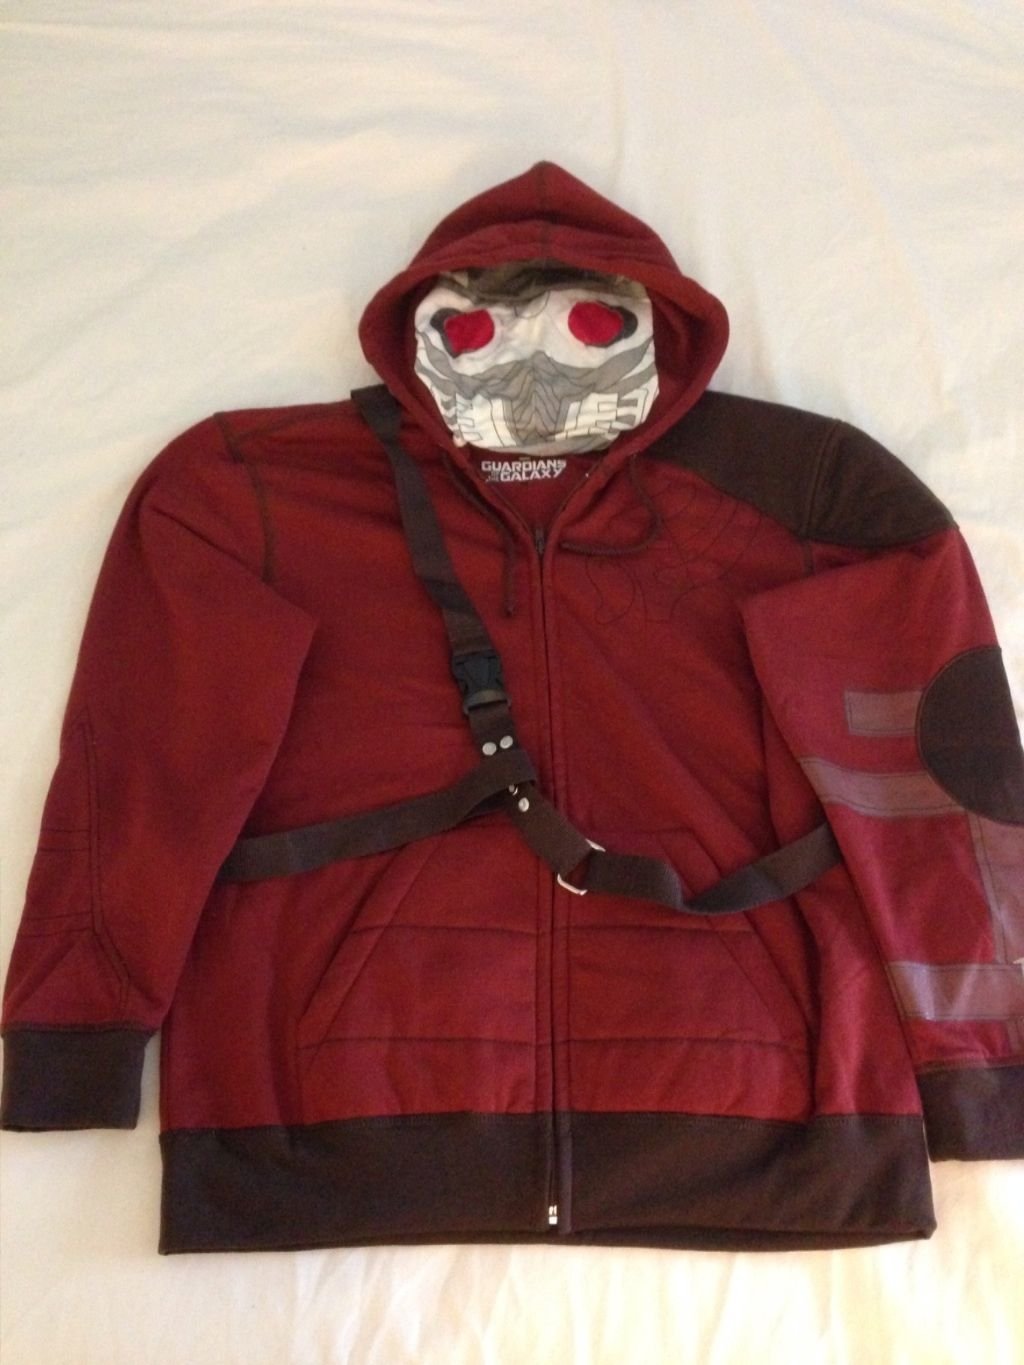 SDCC 2014 Marvel Exclusive Star Lord Hoodie - Extremely RARE